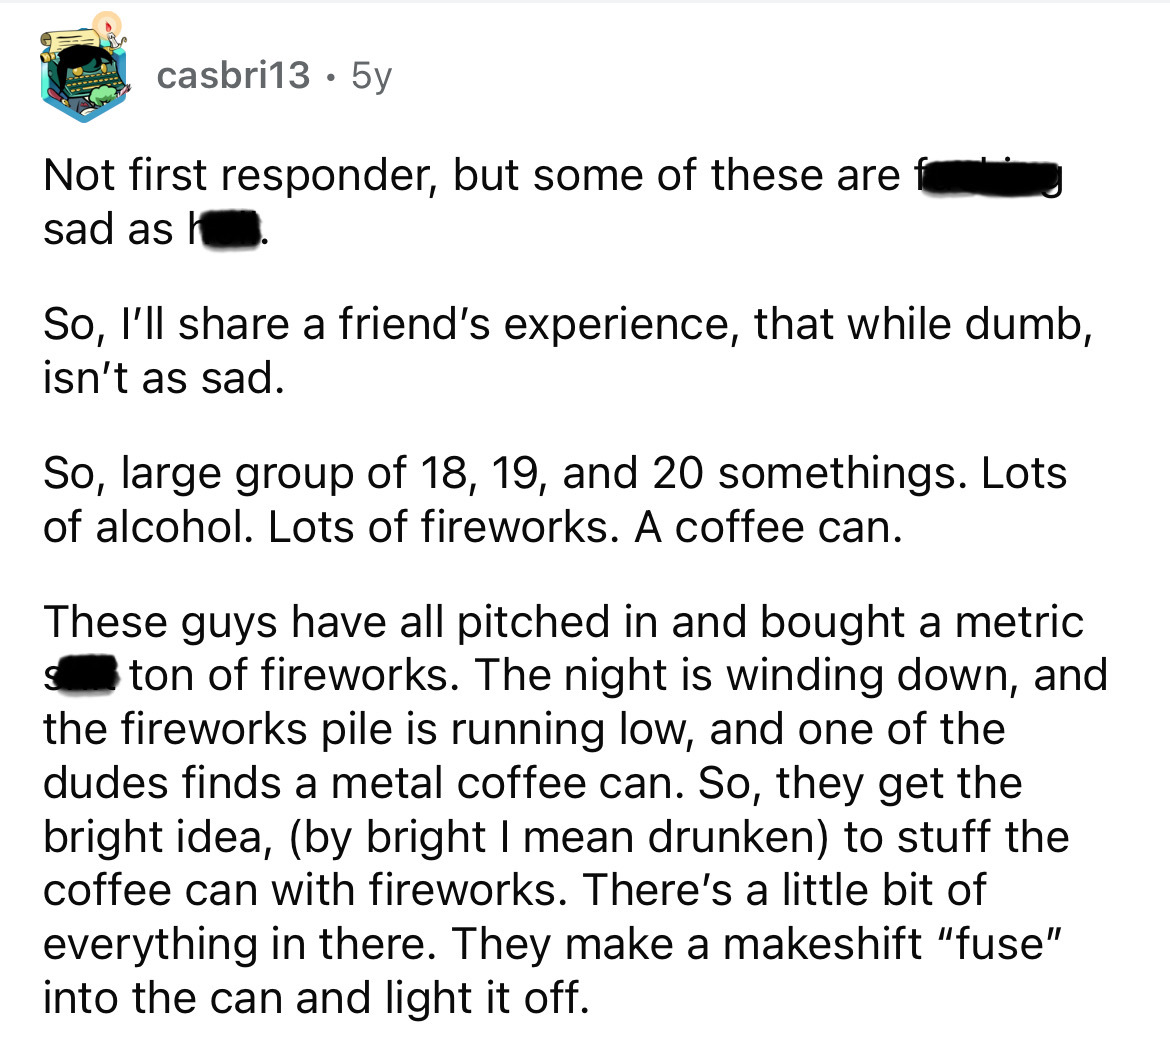 screenshot - casbri13.5y Not first responder, but some of these are sad as h So, I'll a friend's experience, that while dumb, isn't as sad. So, large group of 18, 19, and 20 somethings. Lots of alcohol. Lots of fireworks. A coffee can. These guys have all